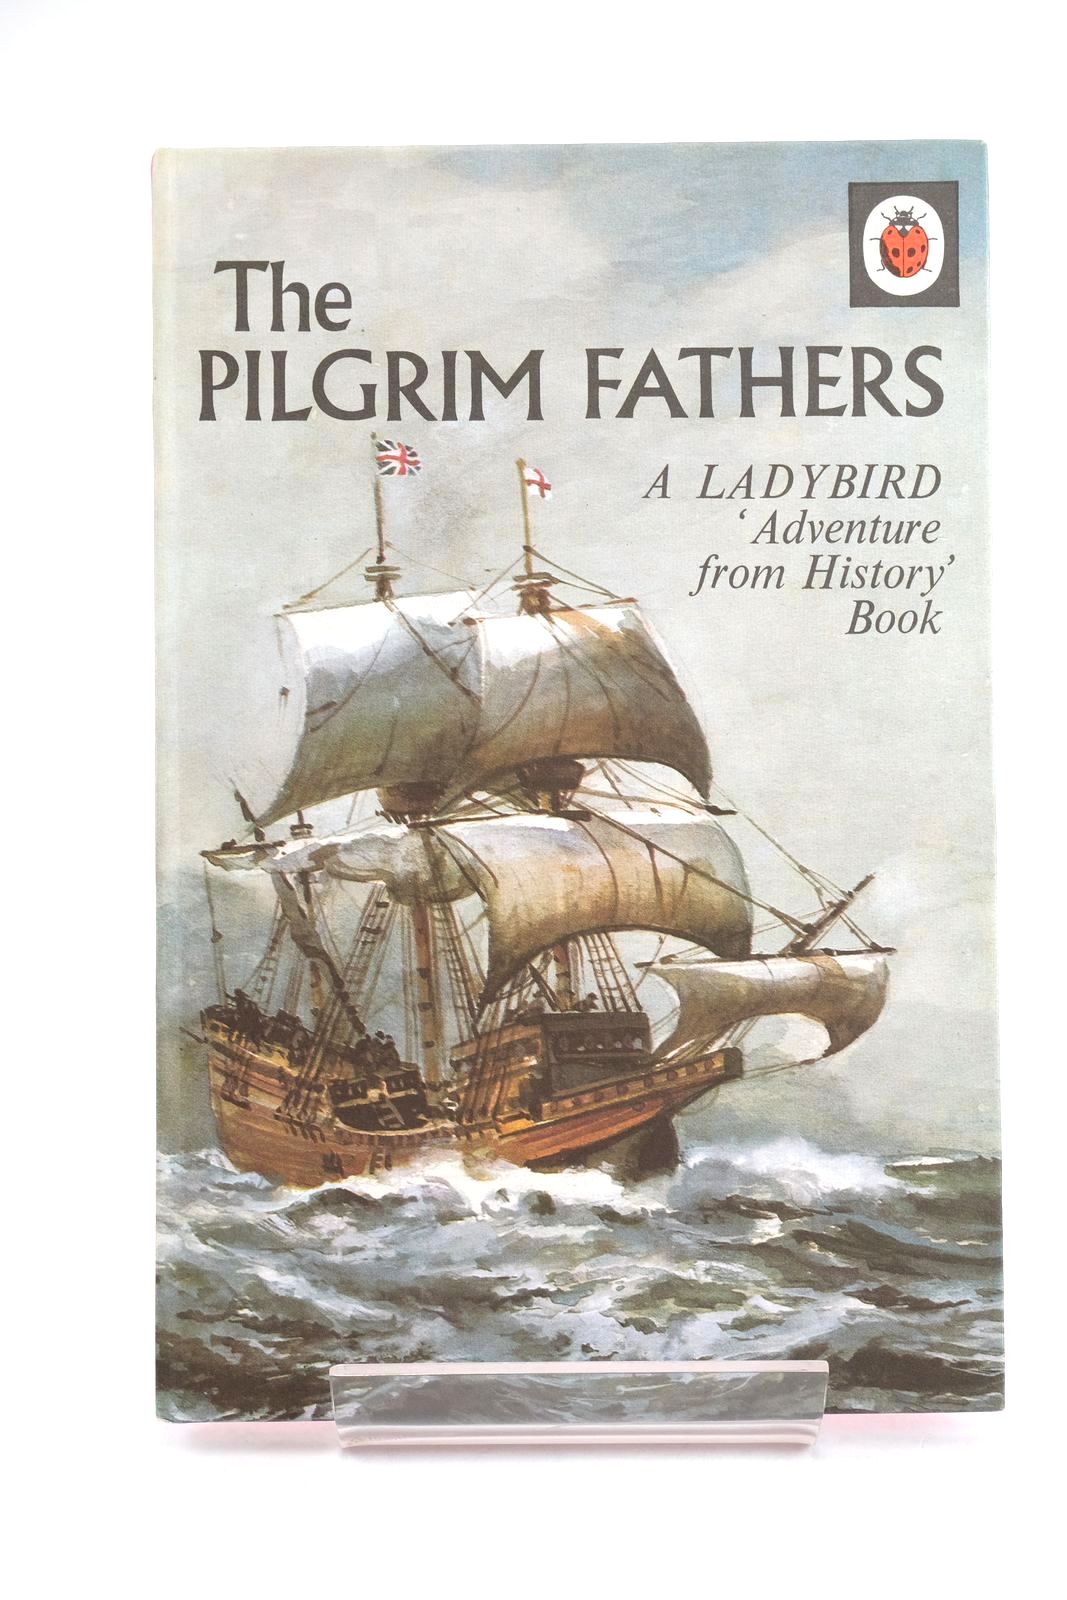 Photo of THE PILGRIM FATHERS written by Peach, L. Du Garde illustrated by Kenney, John published by Wills & Hepworth Ltd. (STOCK CODE: 1324404)  for sale by Stella & Rose's Books